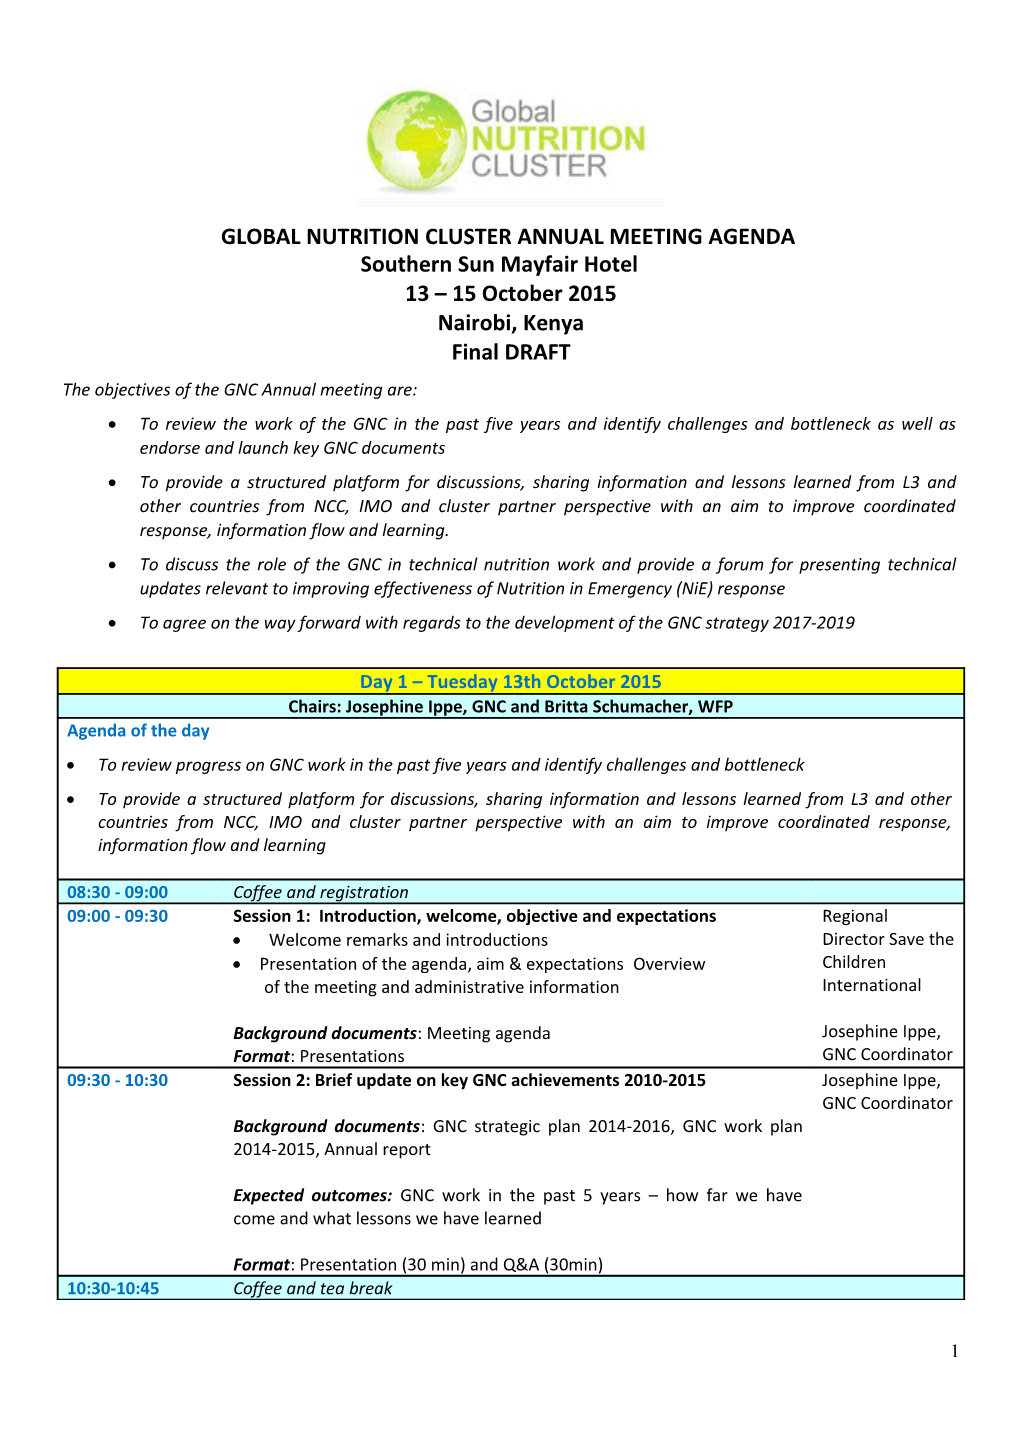 Global Nutrition Cluster Annual Meeting Agenda